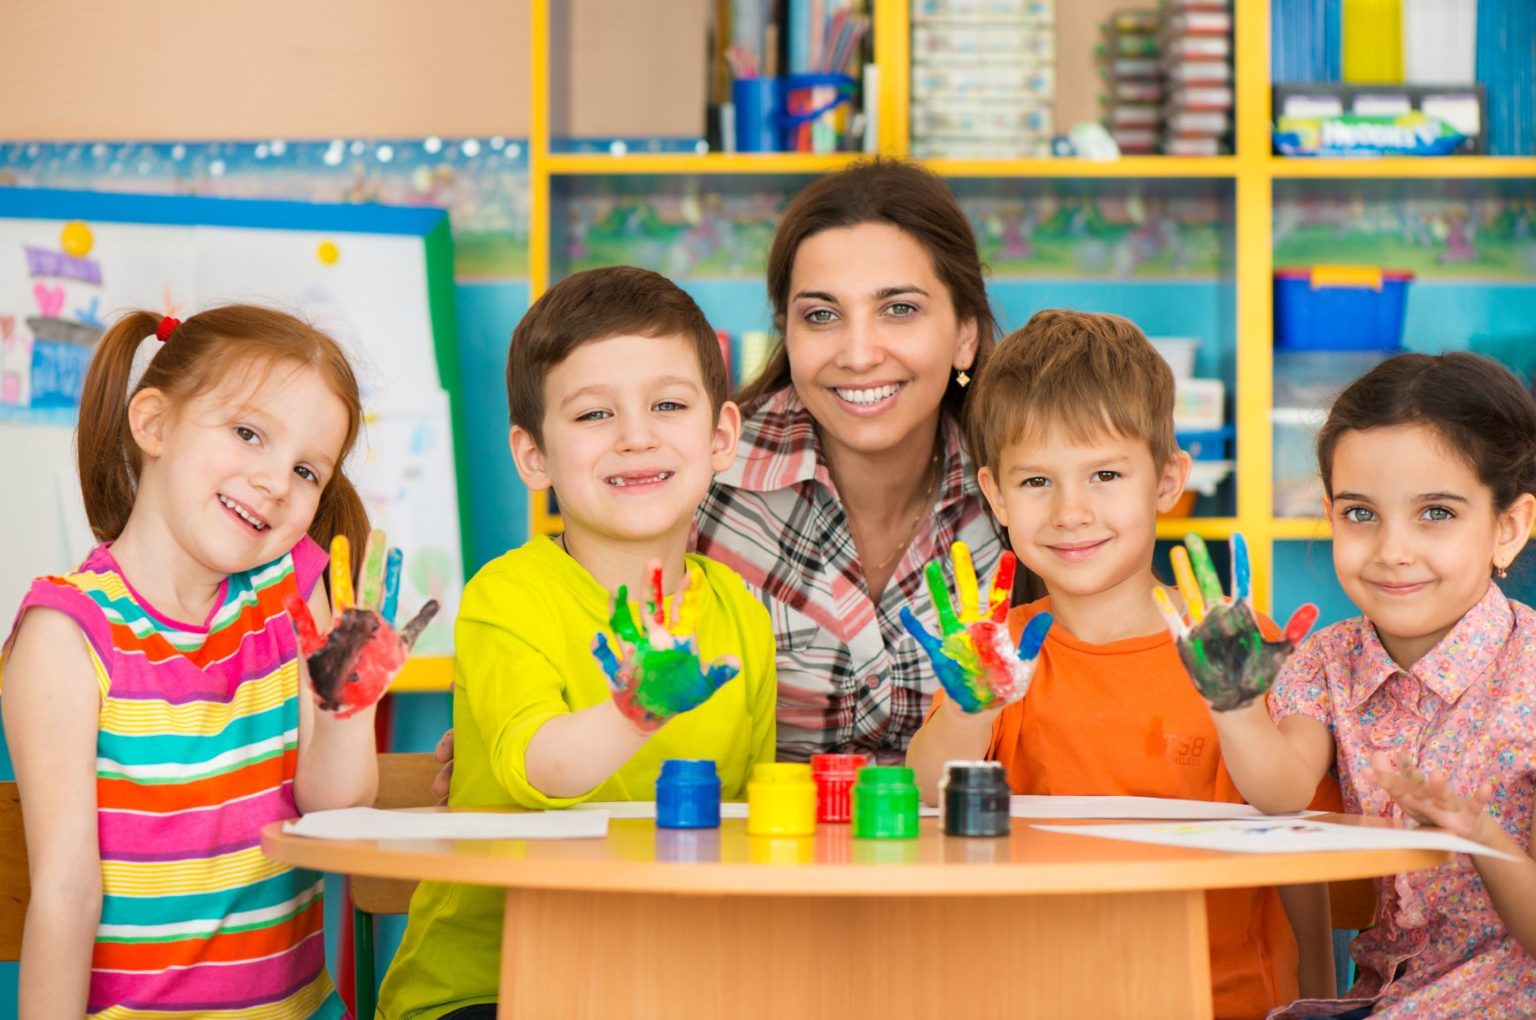 Jobs in the early learning centre